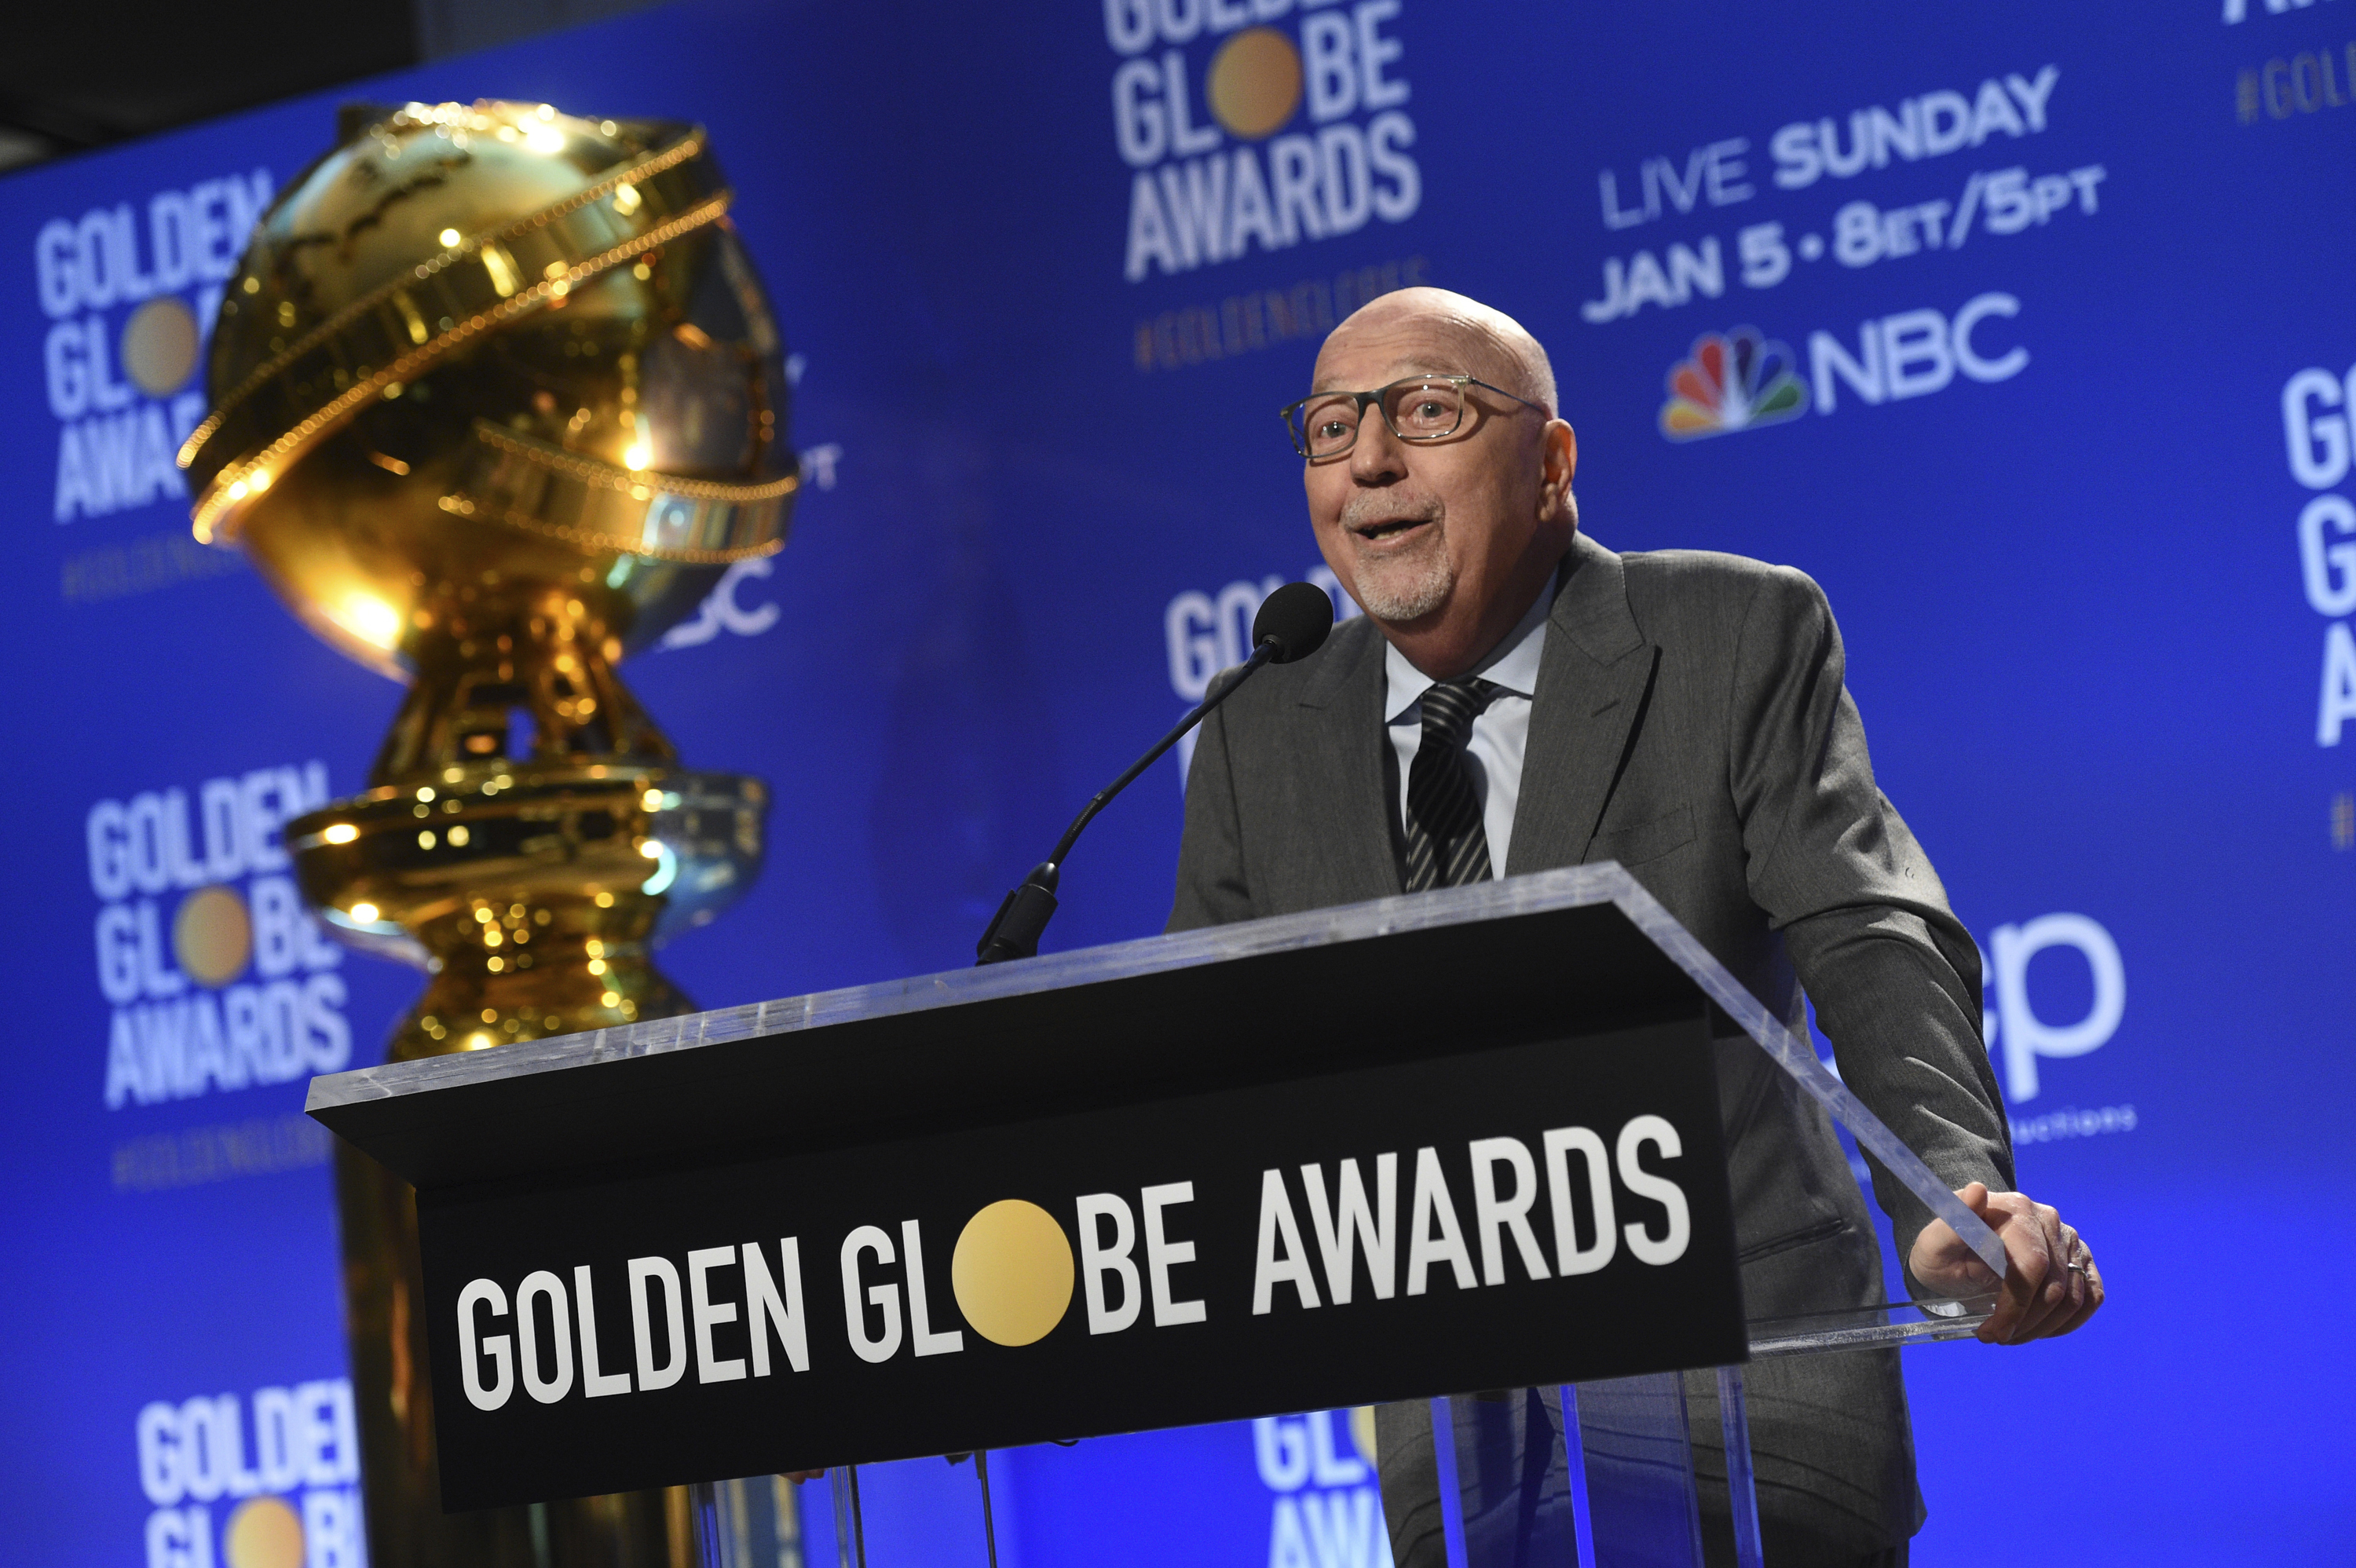 FILE - Lorenzo Soria speaks at the nominations for the 77th annual Golden Globe Awards on Dec. 9, 2019, in Beverly Hills, Calif. Soria, president of the Hollywood Foreign Press Association and former editor of the Italian news weekly L'Espresso, died Friday, the association said. He was 68. Photo: AP